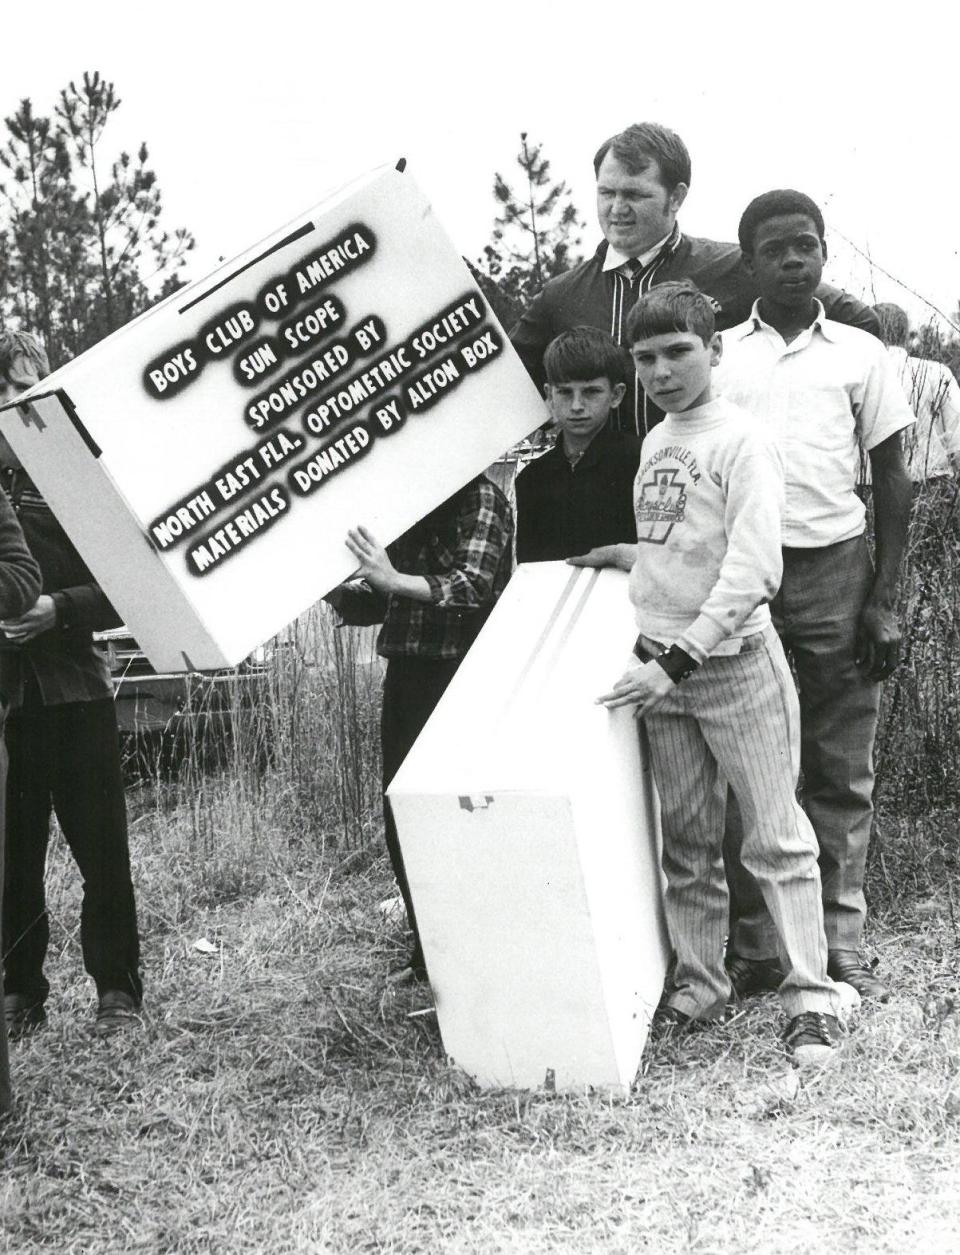 Members of the Boys Club of America crowd around a sun scope in anticipation of the solar eclipse on March 7, 1970.